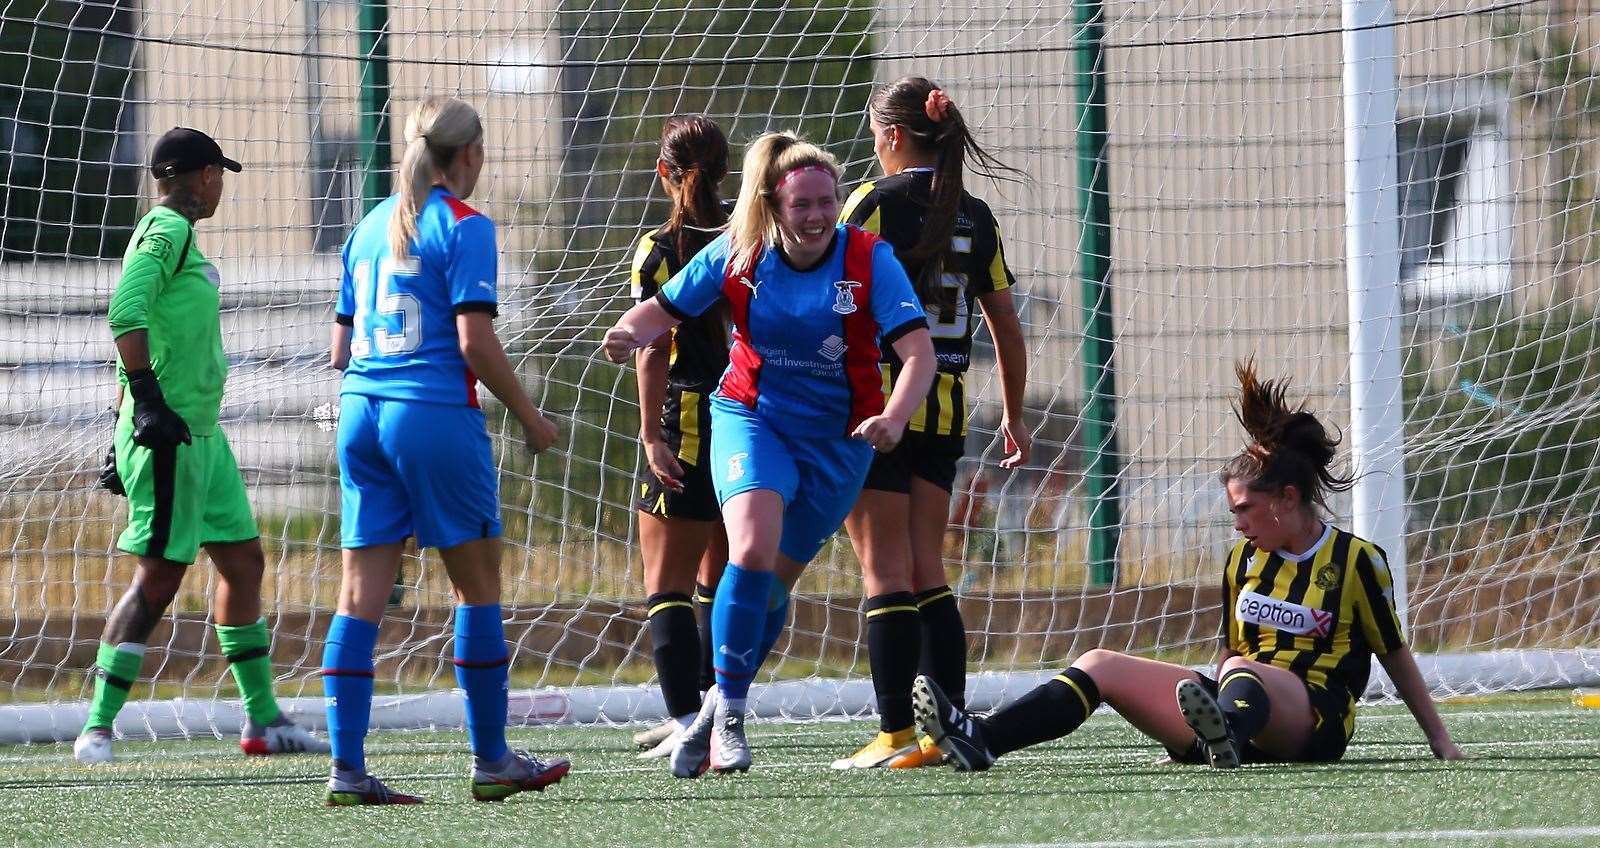 Kayleigh Mackenzie has continued to be a goal threat even from a deeper starting position in defeat for Caley Thistle. Picture: Chris McCluskie/Sportpix